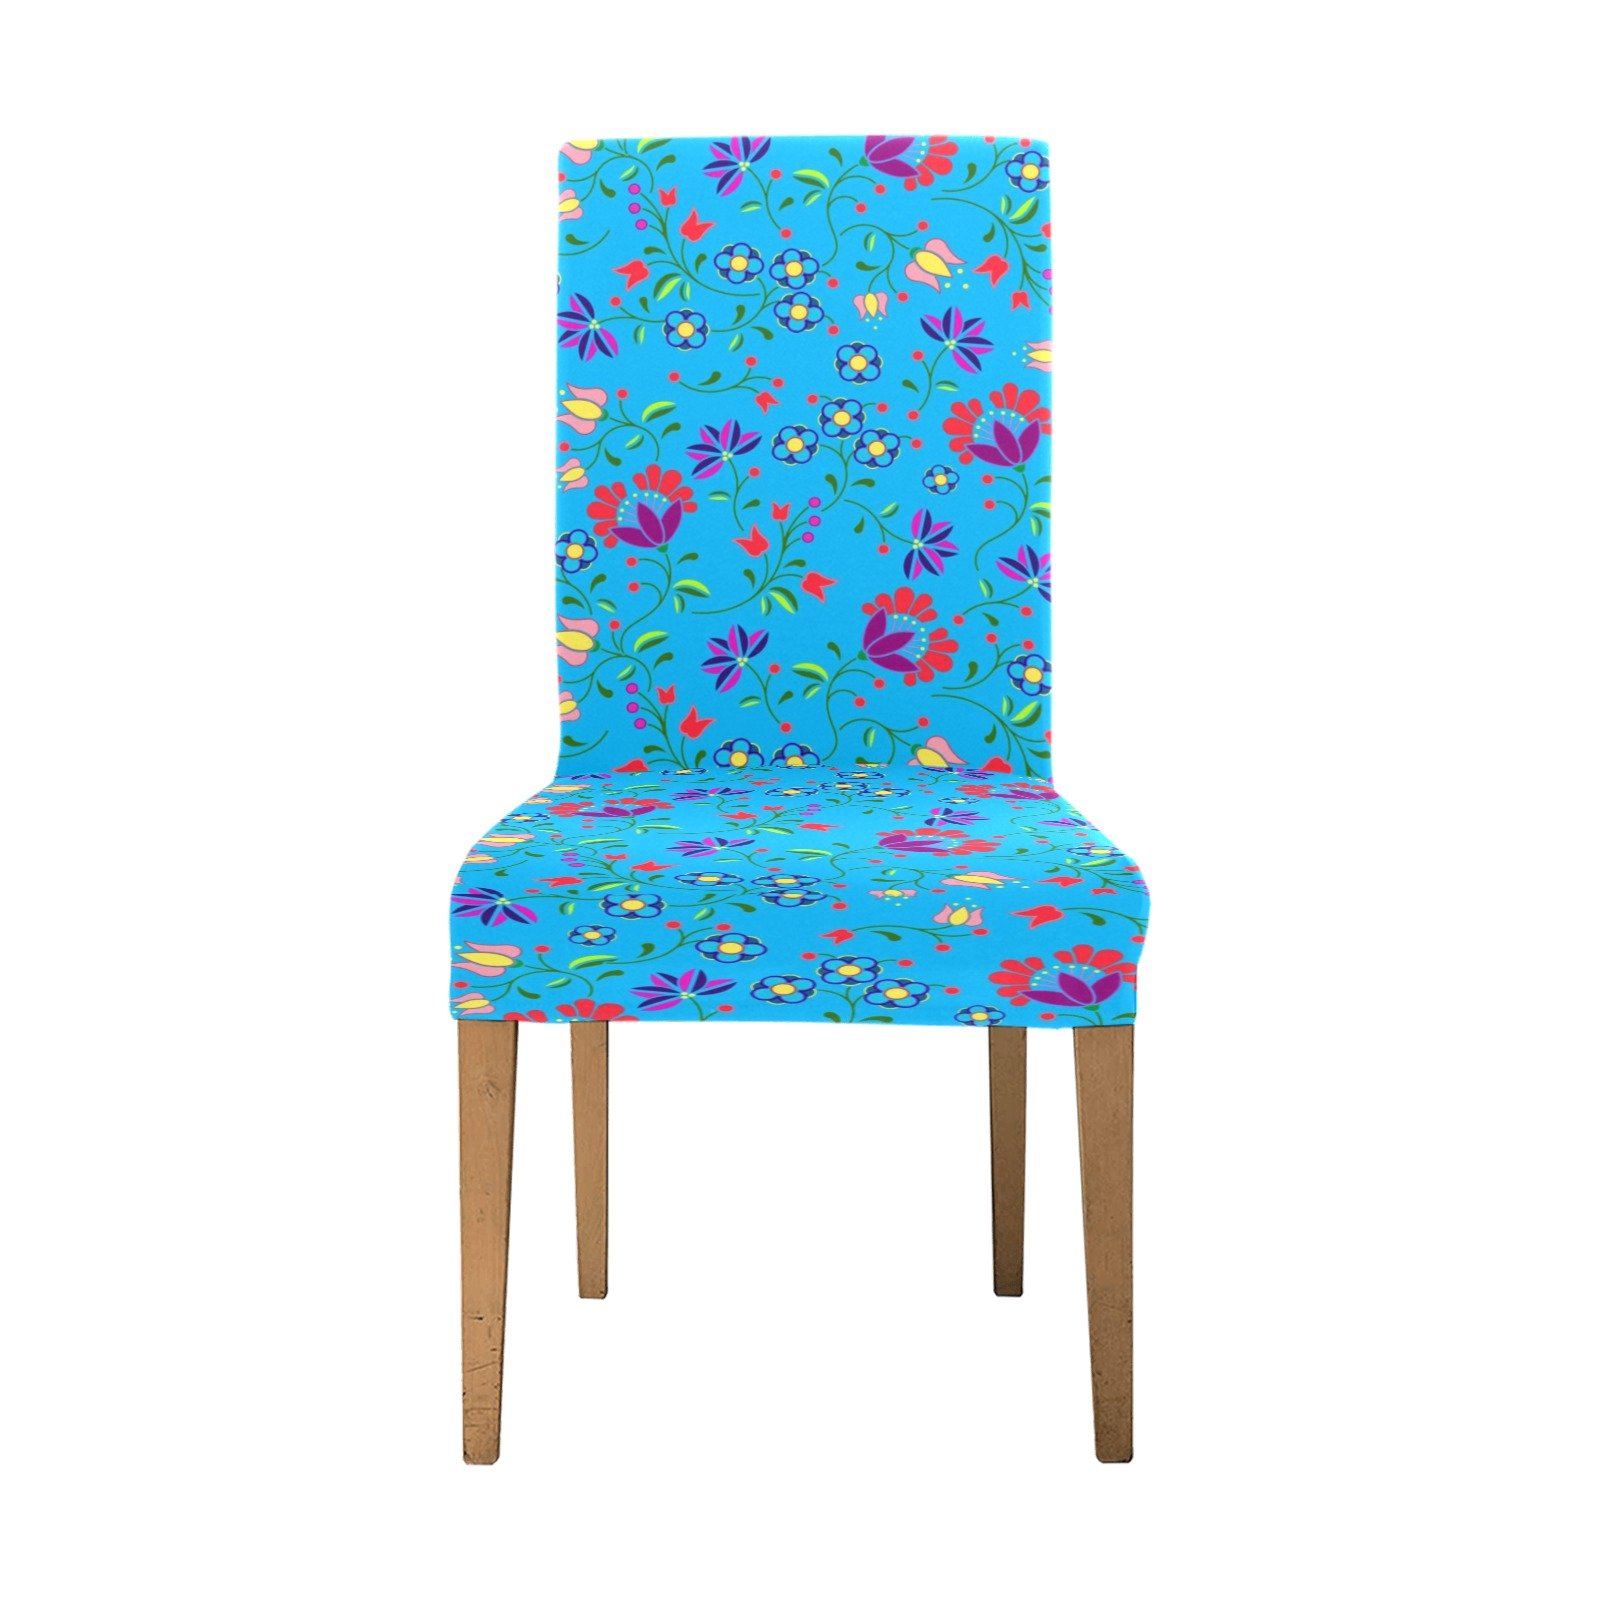 Fleur Indigine Ciel Chair Cover (Pack of 6) Chair Cover (Pack of 6) e-joyer 